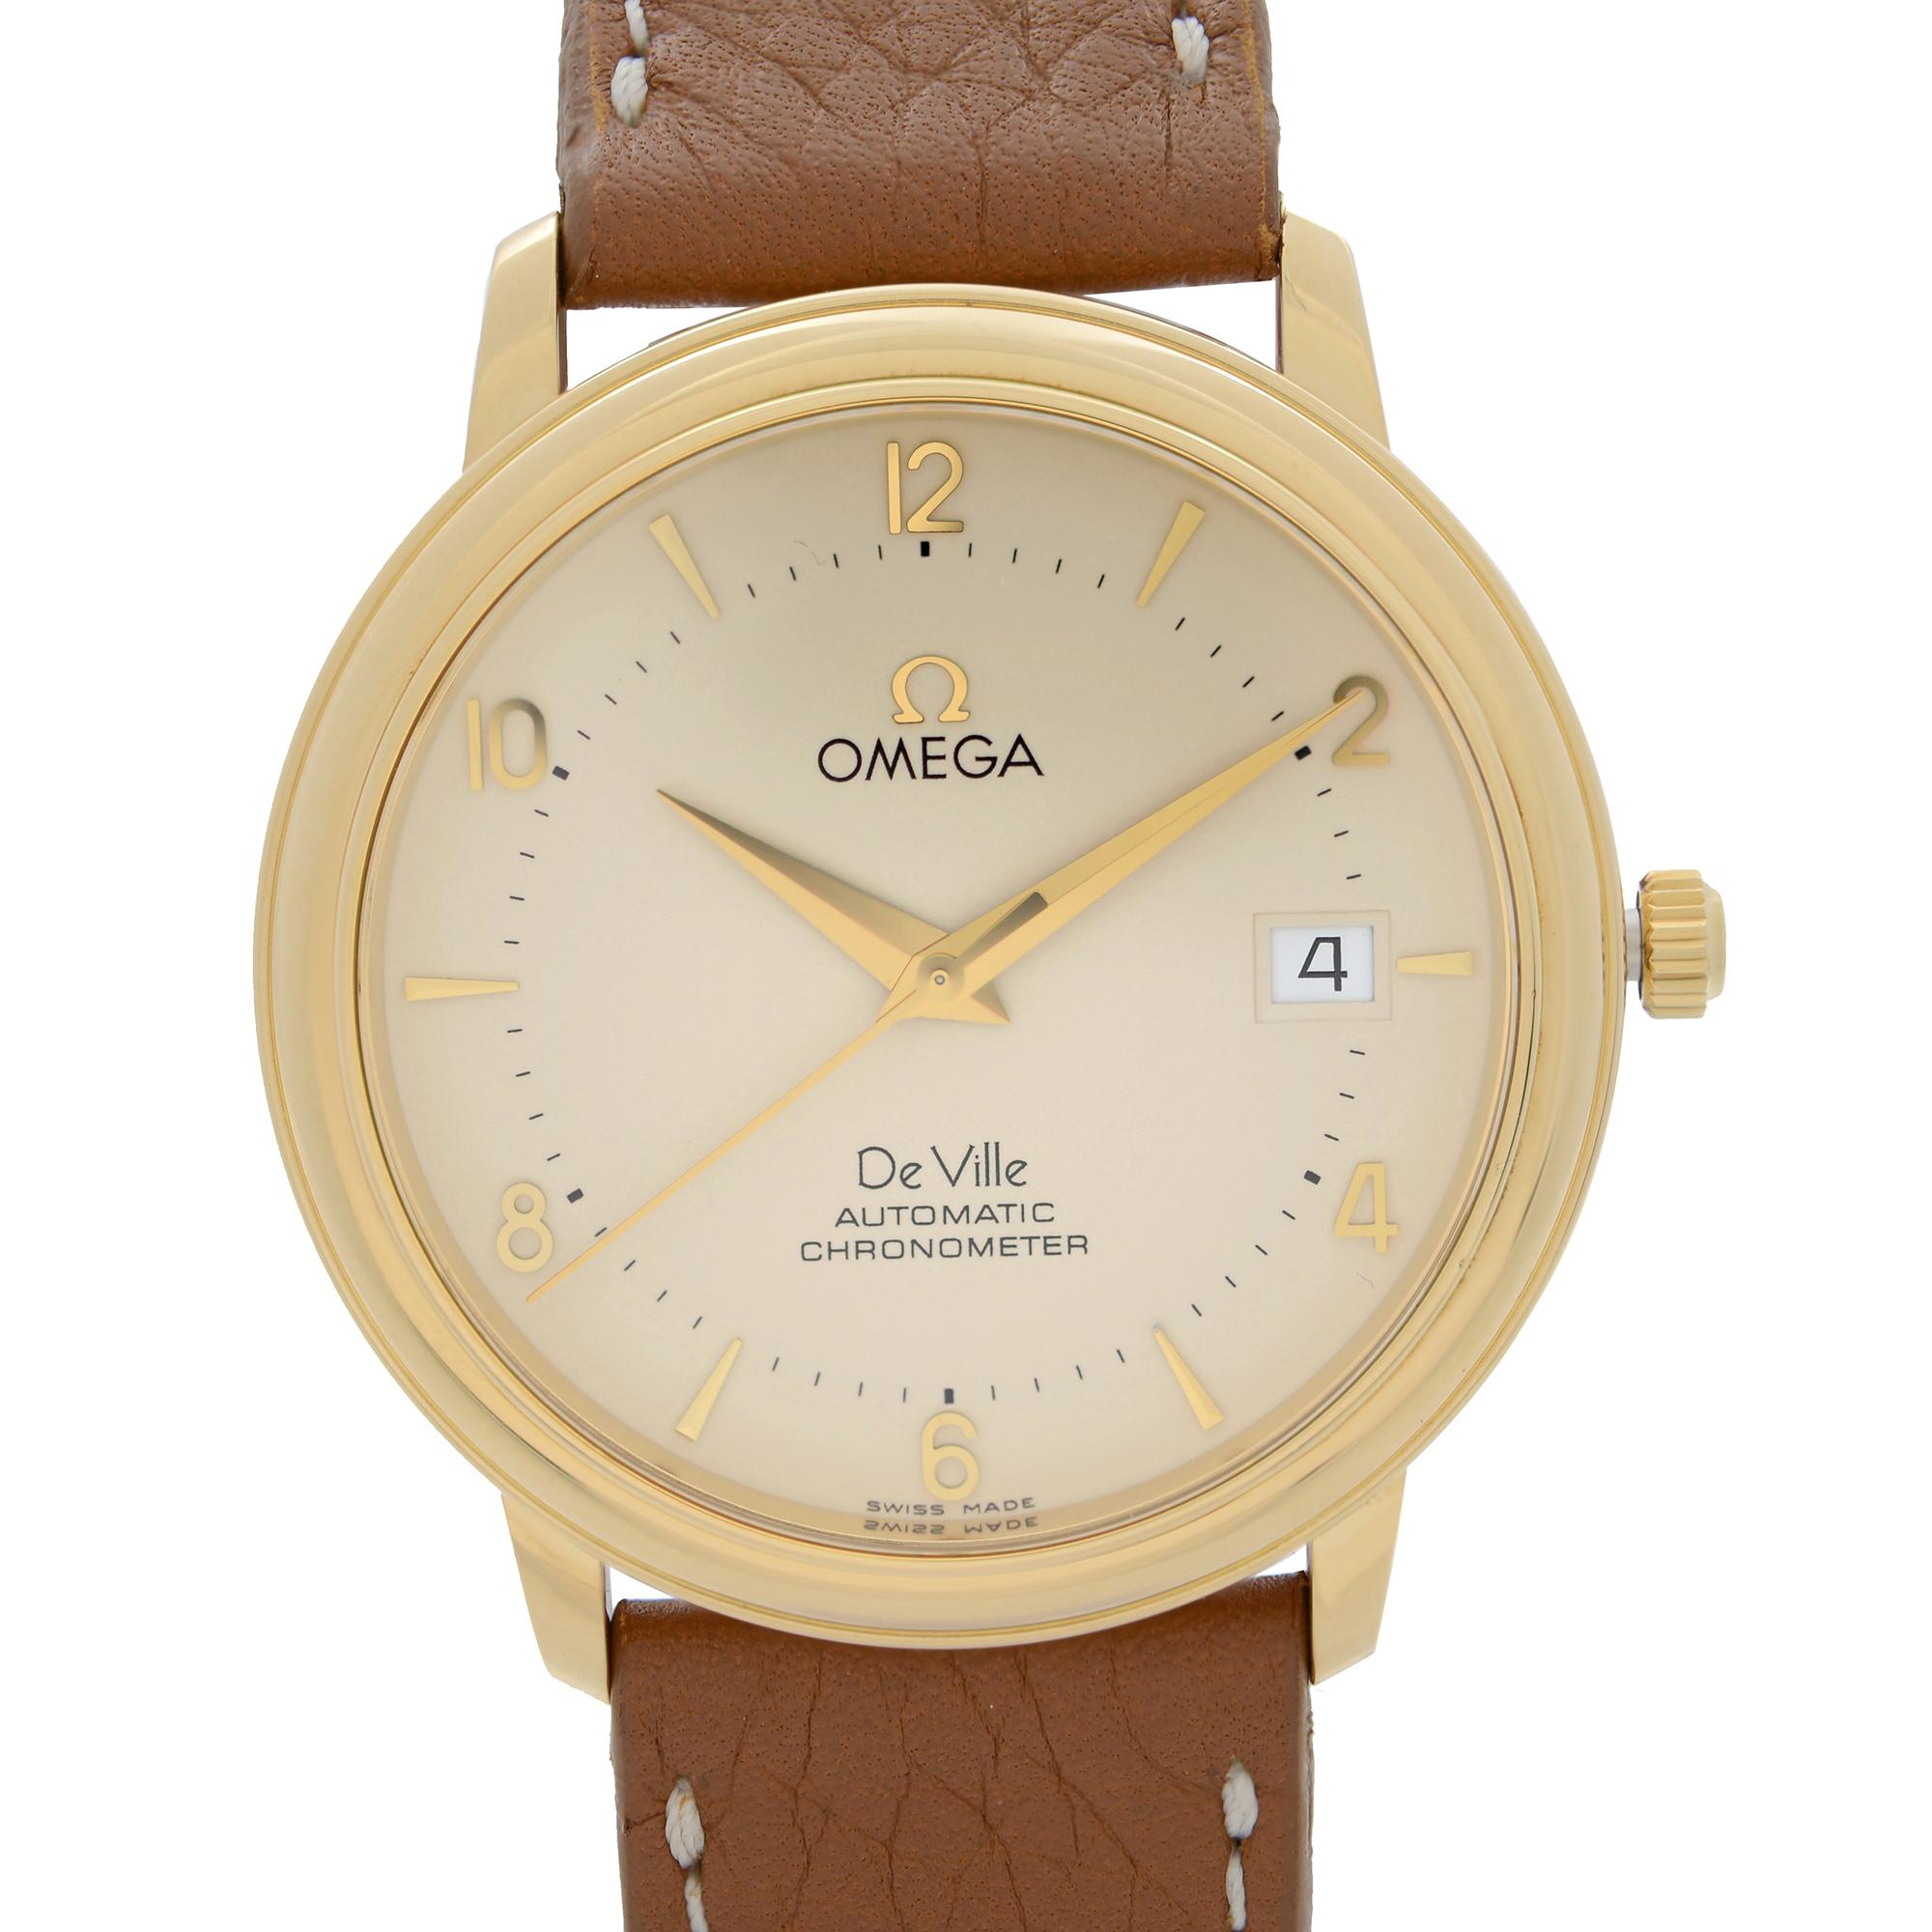 Pre-owned Omega De Ville Prestige 18k Yellow Gold 36.5 mm Chronometer Cream Dial Men's Automatic Watch 4612.30.02. Aftermarket Band but gold-tone Stainless steel Omega Buckle. The Timepiece is powered by an Automatic movement. Features: Polished 18k